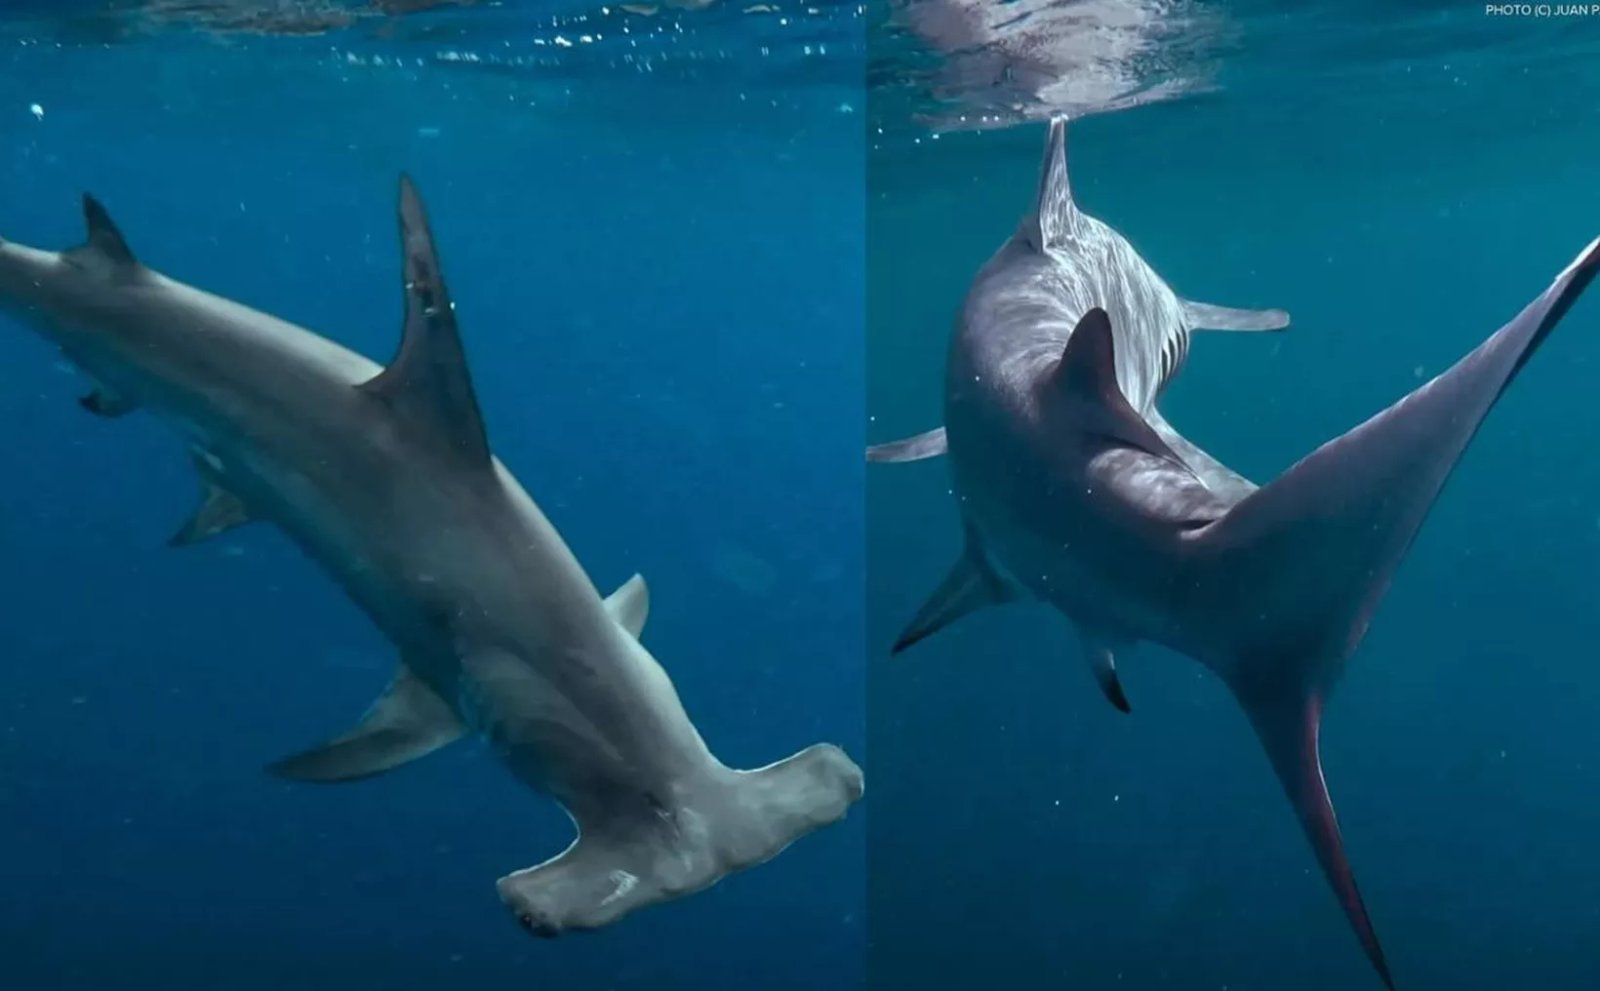 Two images of hammerhead sharks swimming in the blue waters of the ocean, displaying their distinctive head shape.